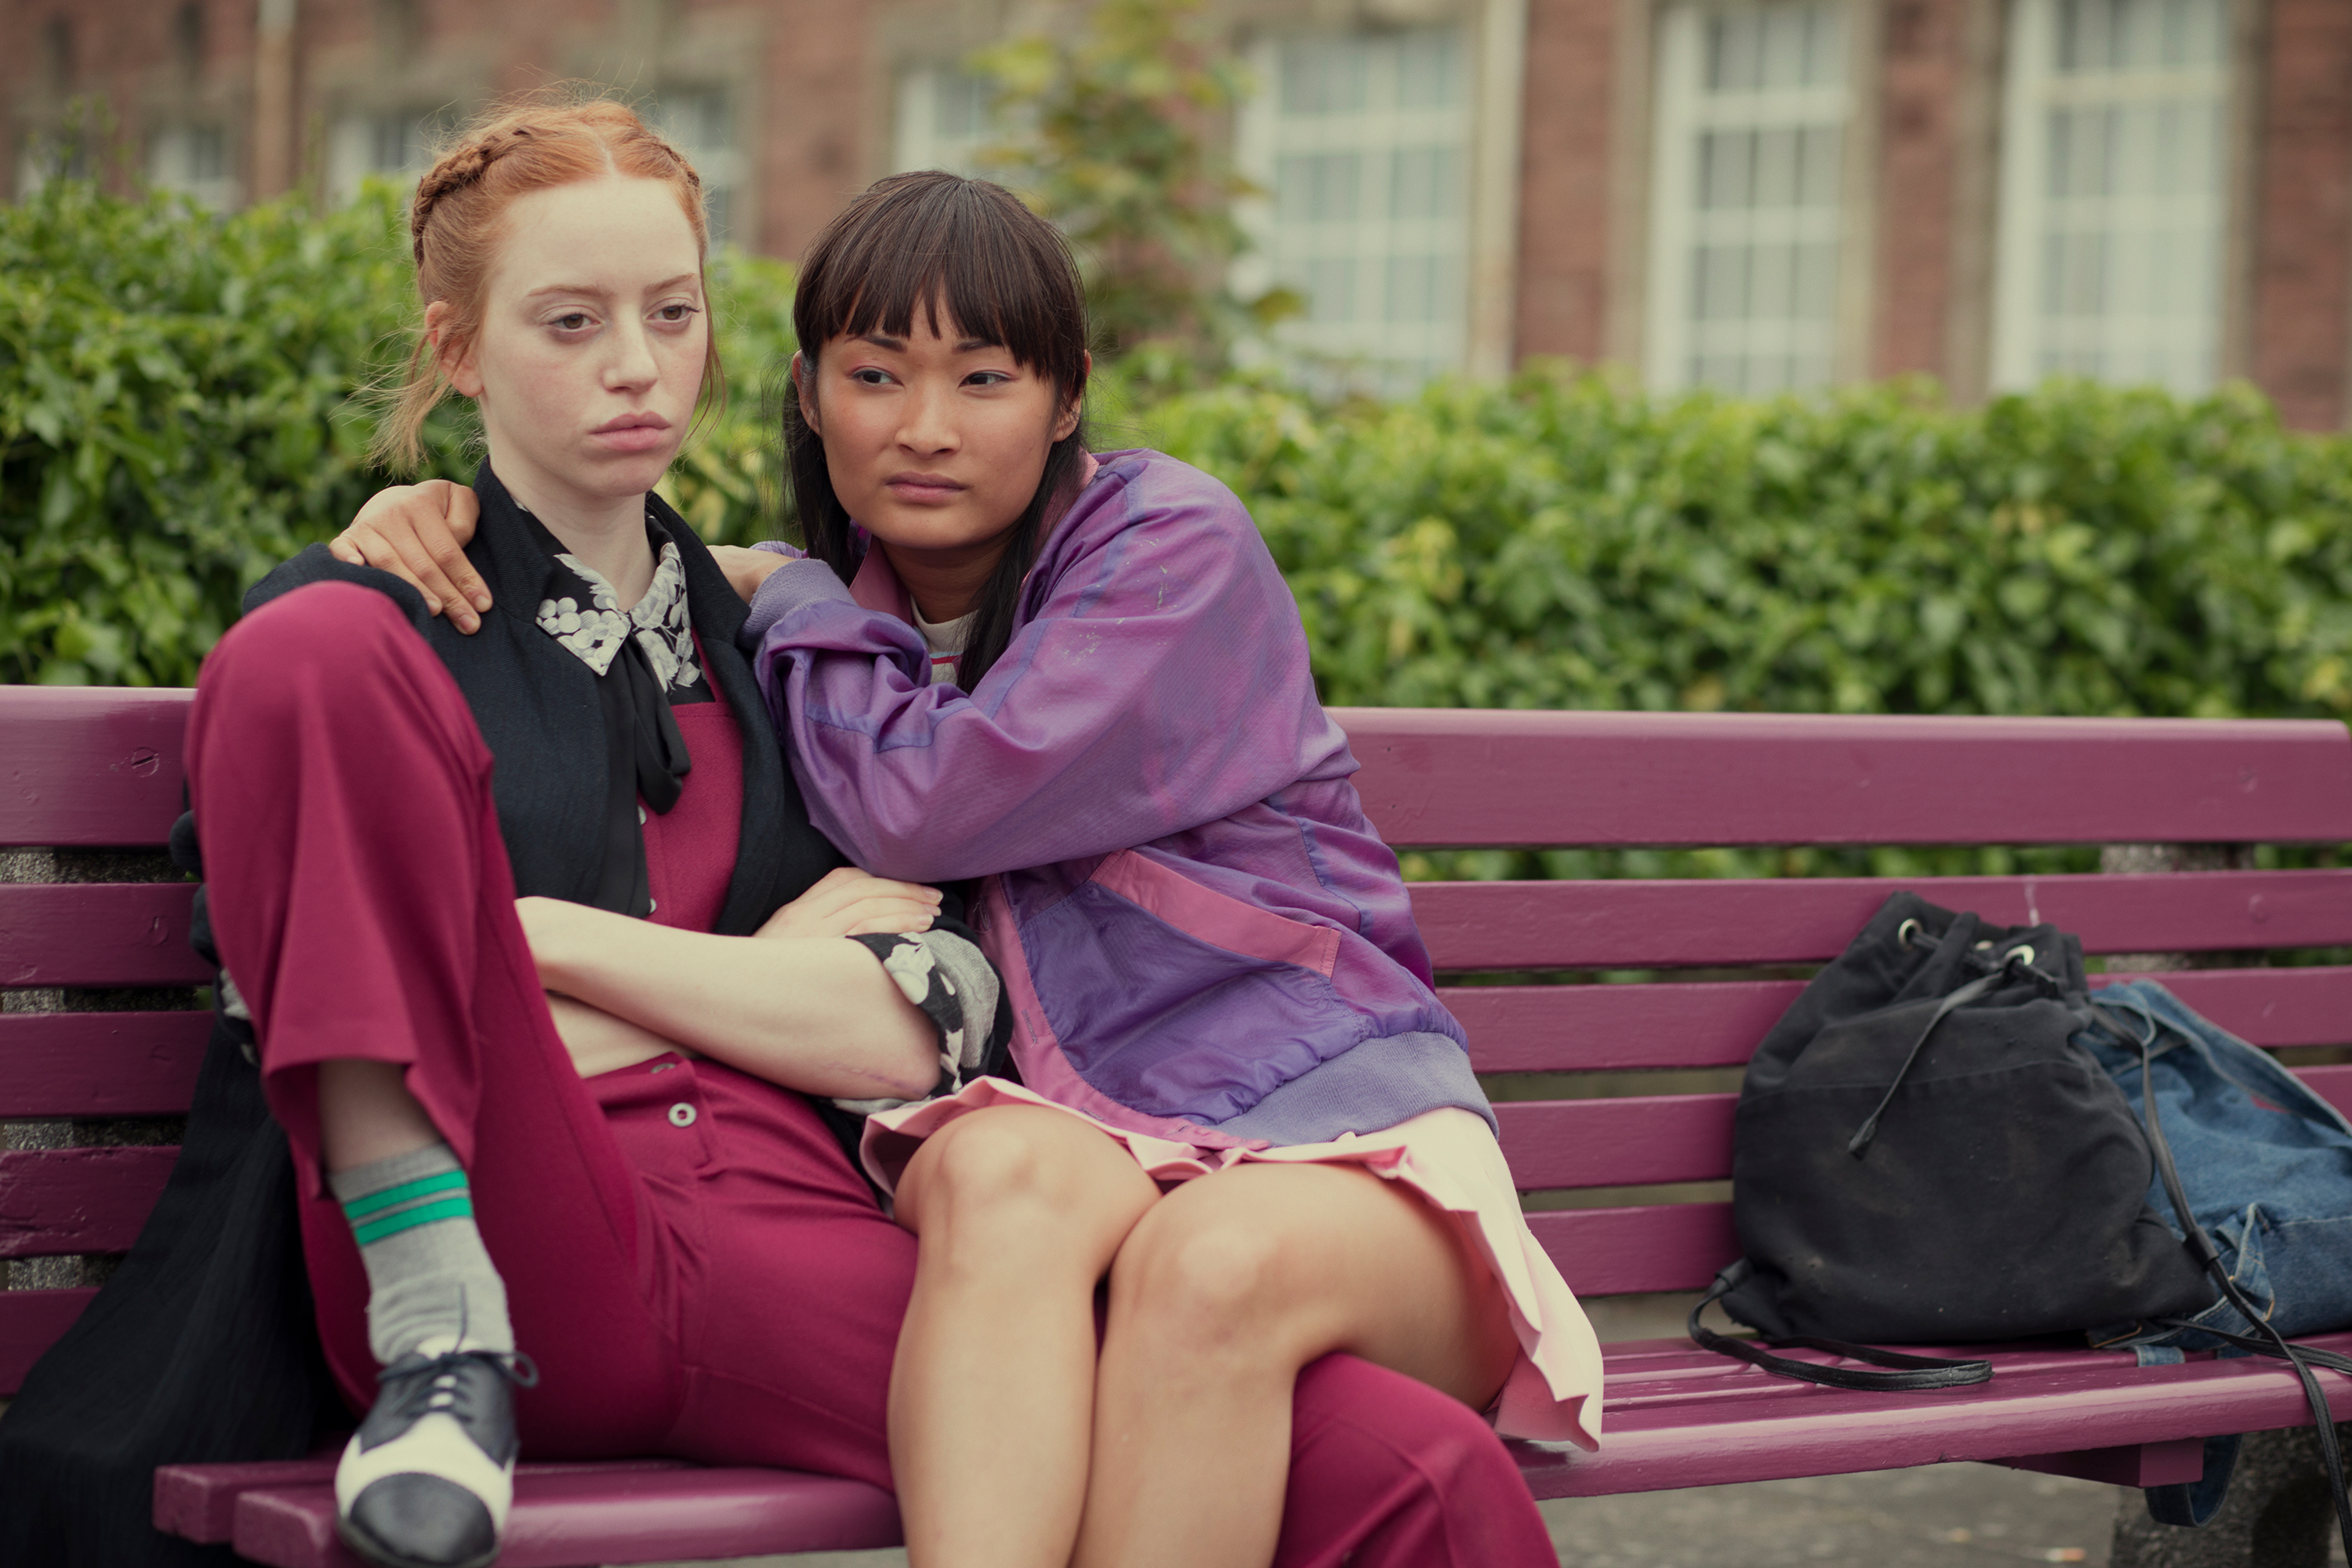 Lesbian Relationships - Why You Need to Watch Netflix's 'Sex Education' - VICE